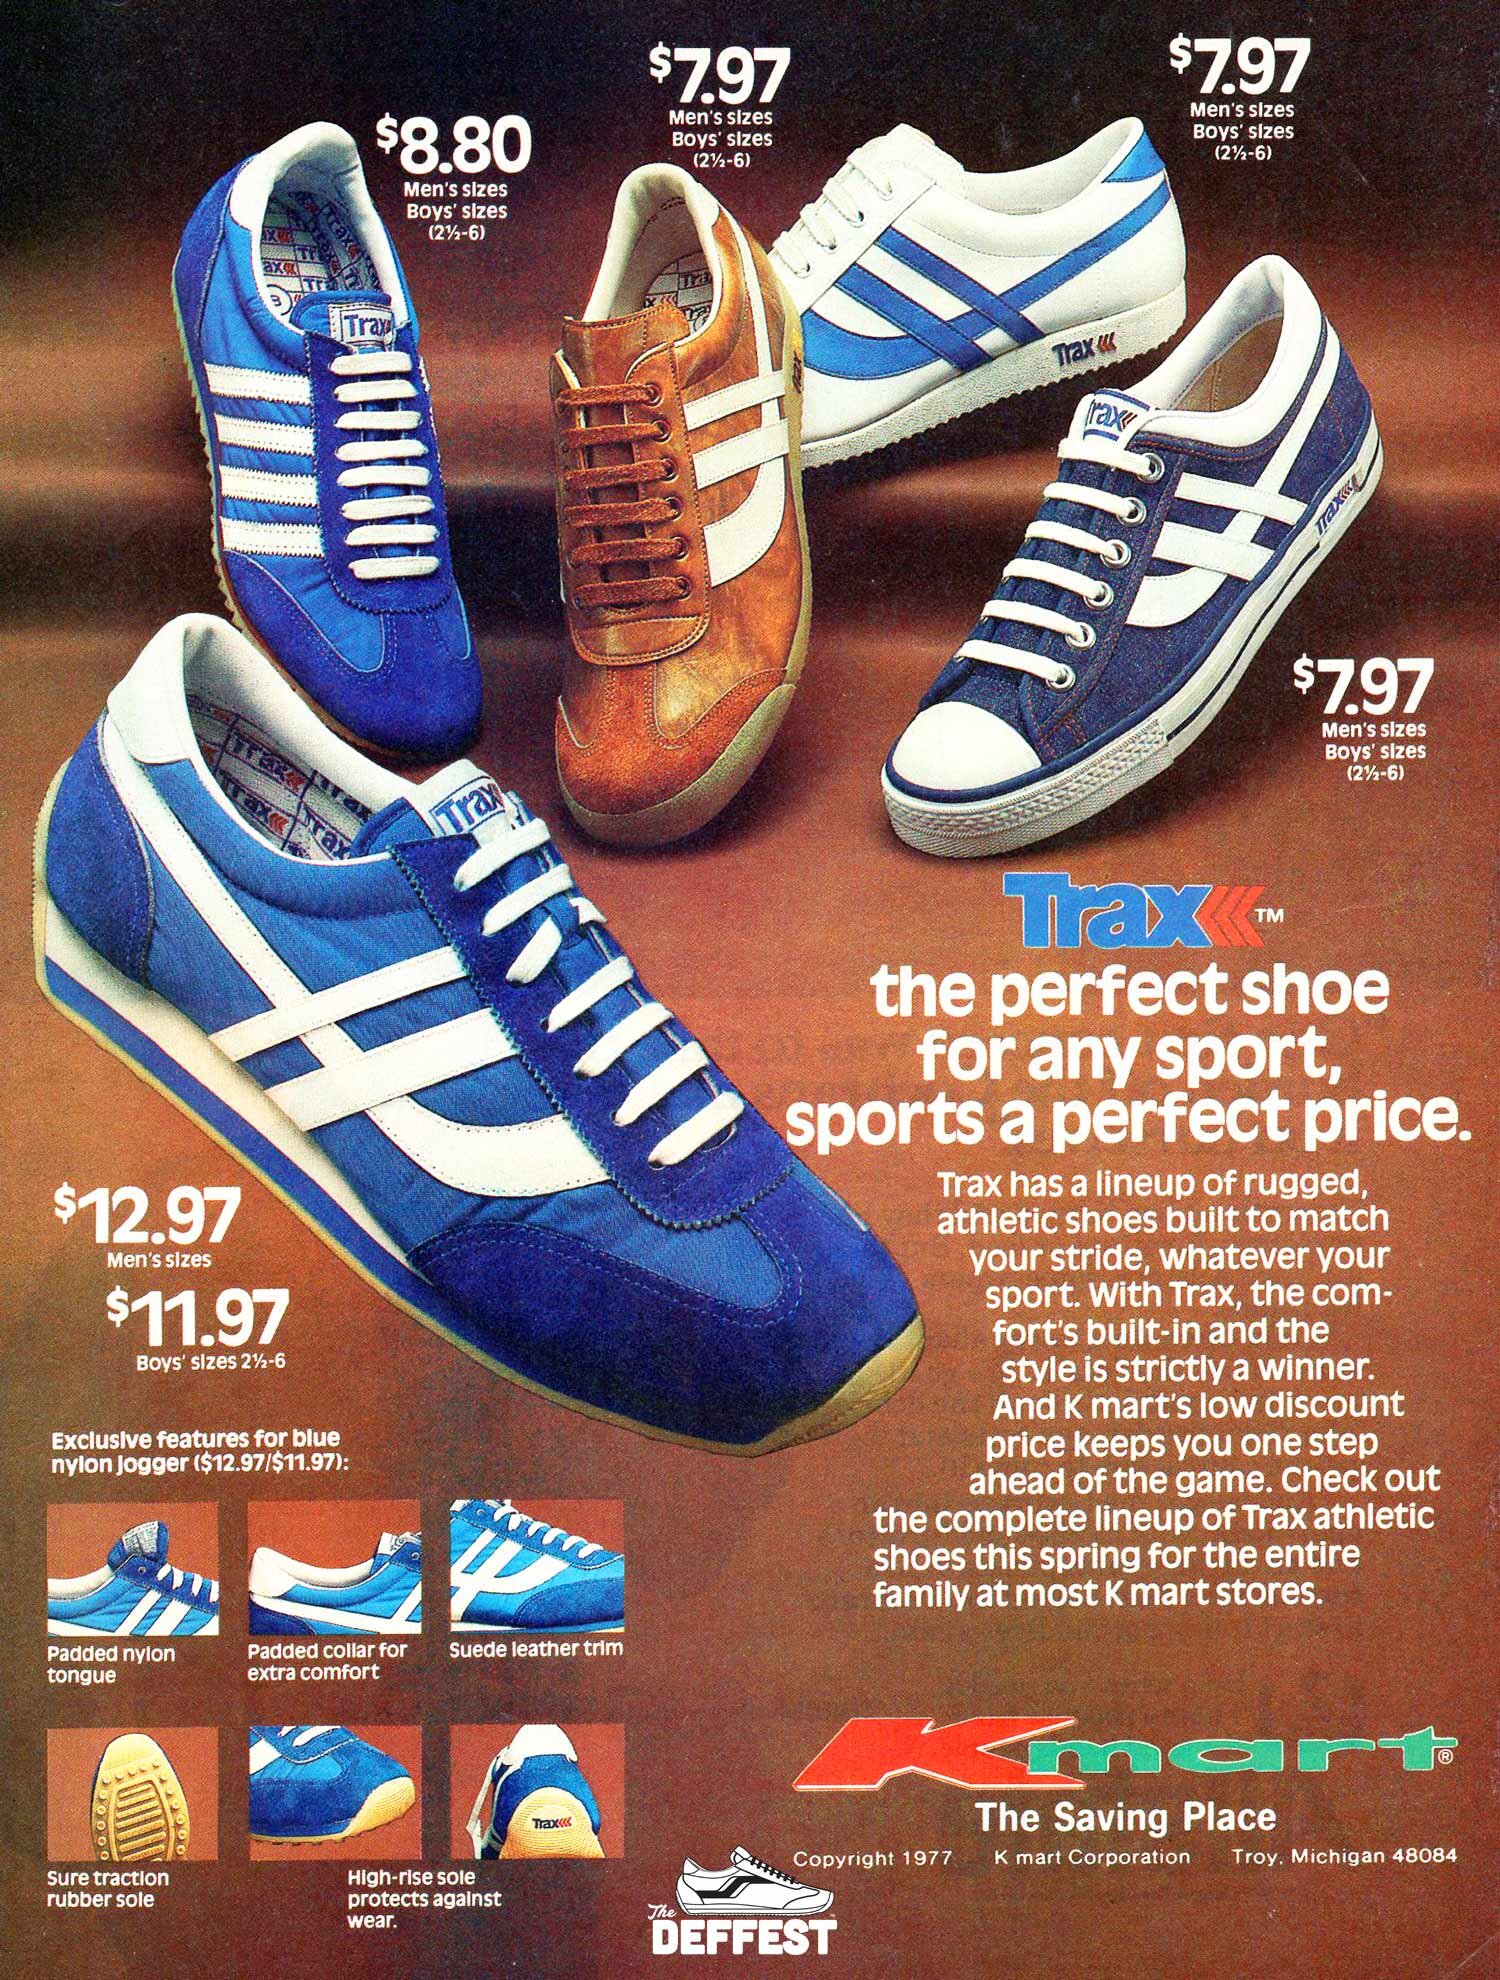 vintage advertising — The Deffest®. A vintage and retro sneaker